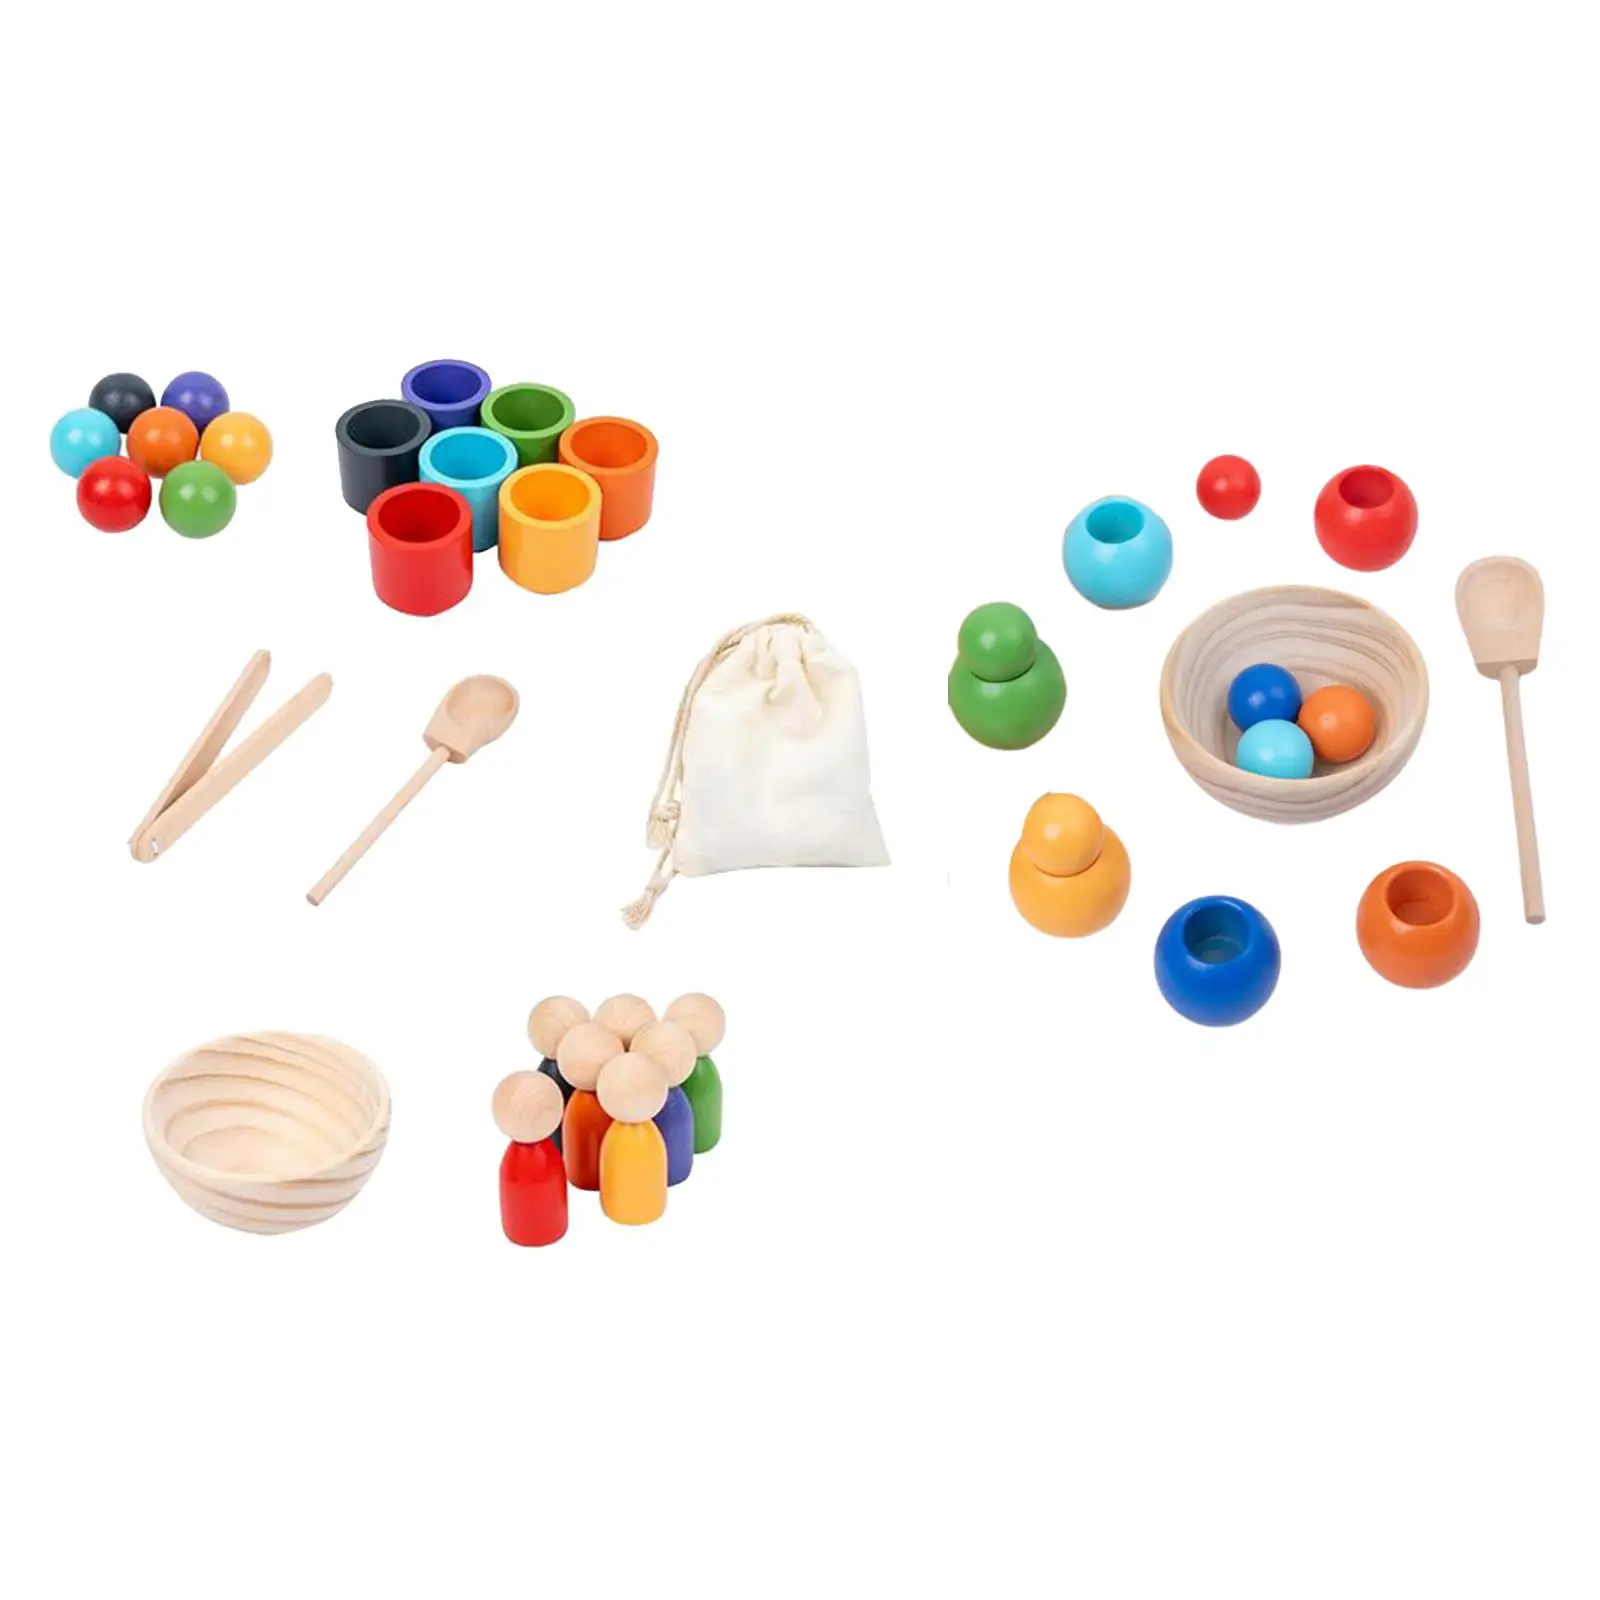 Balls in Cups Montessori Toy Preschool Sensory Toys Wooden Toy for Toddlers Baby Fine Motor Board Game Color Classification